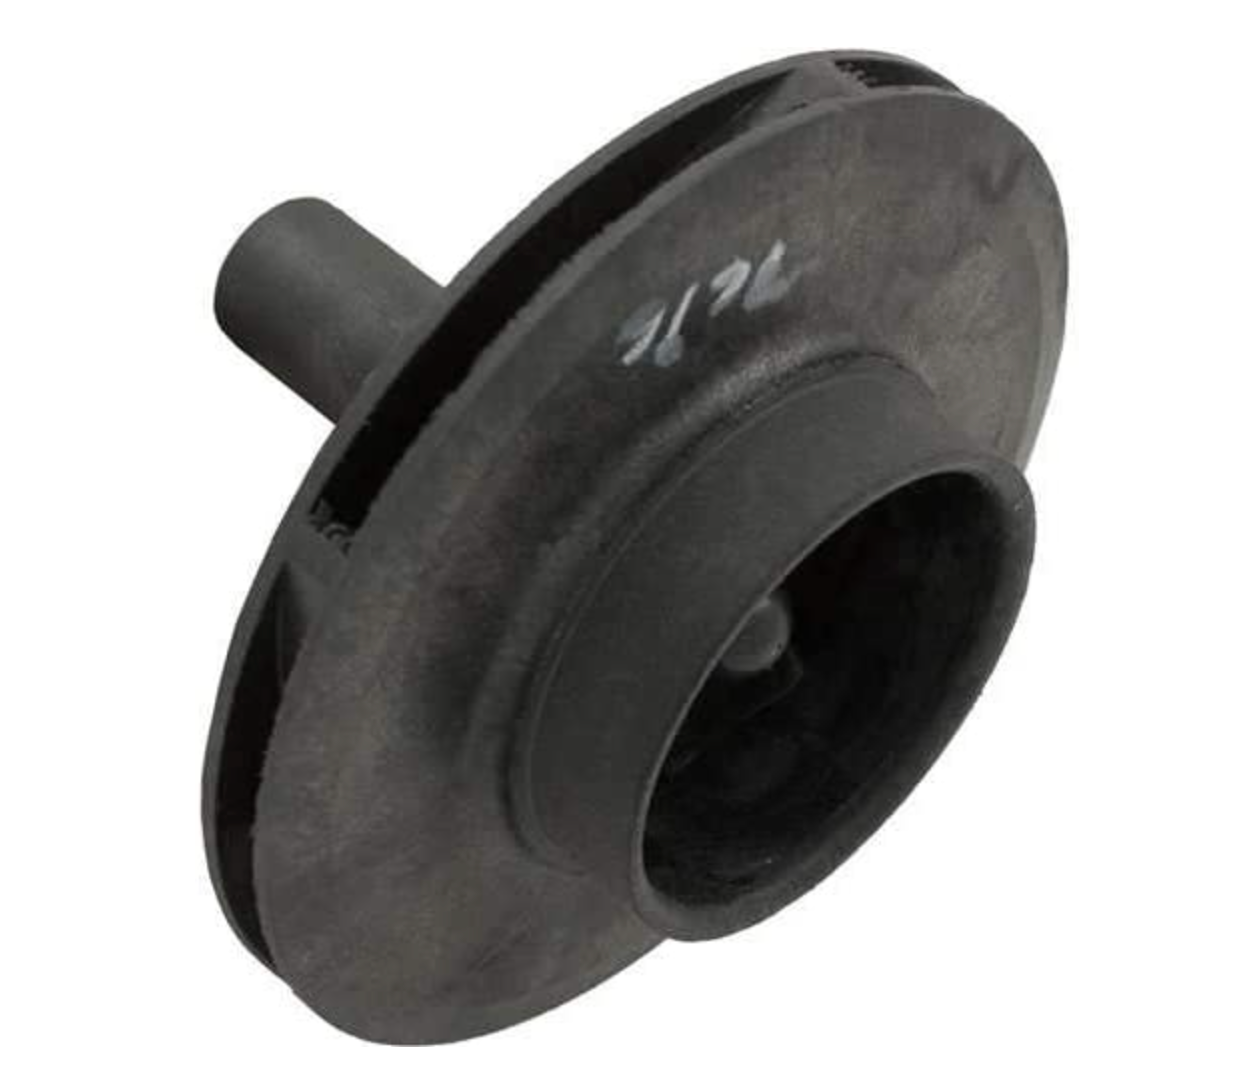 Sta-Rite Dyna-Glas/Dyna-Max Series Replacement Parts Impeller - 1-1/2 HP C105-236PC